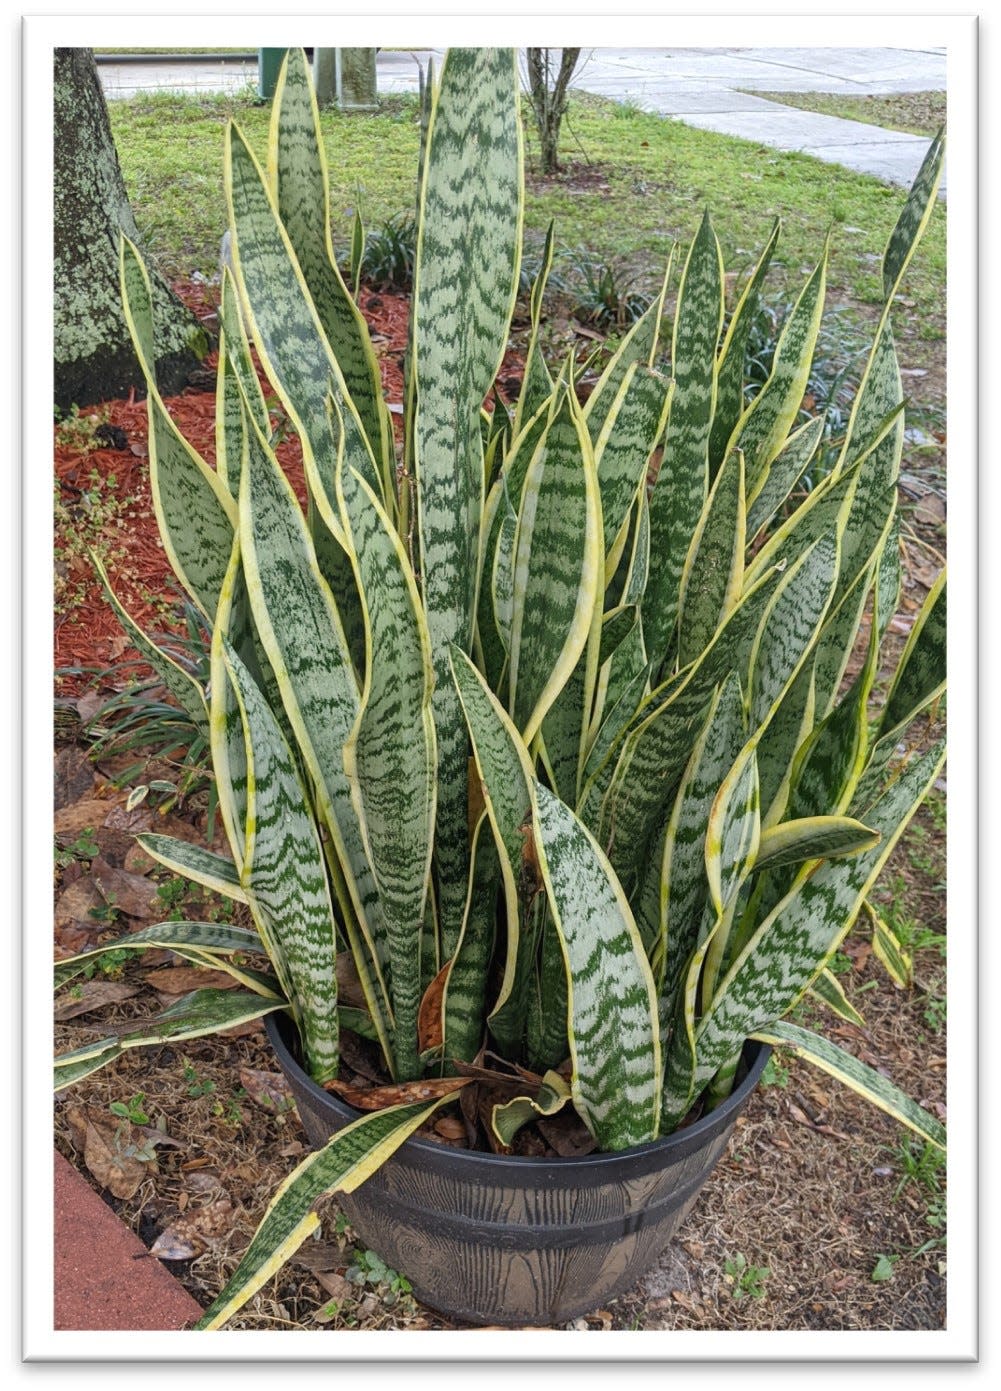 Snake plant (Dracaena tifasciata) is a hardy houseplant that can harm your pets and should be avoided if you share your home with dogs or cats prone to chewing on plants.